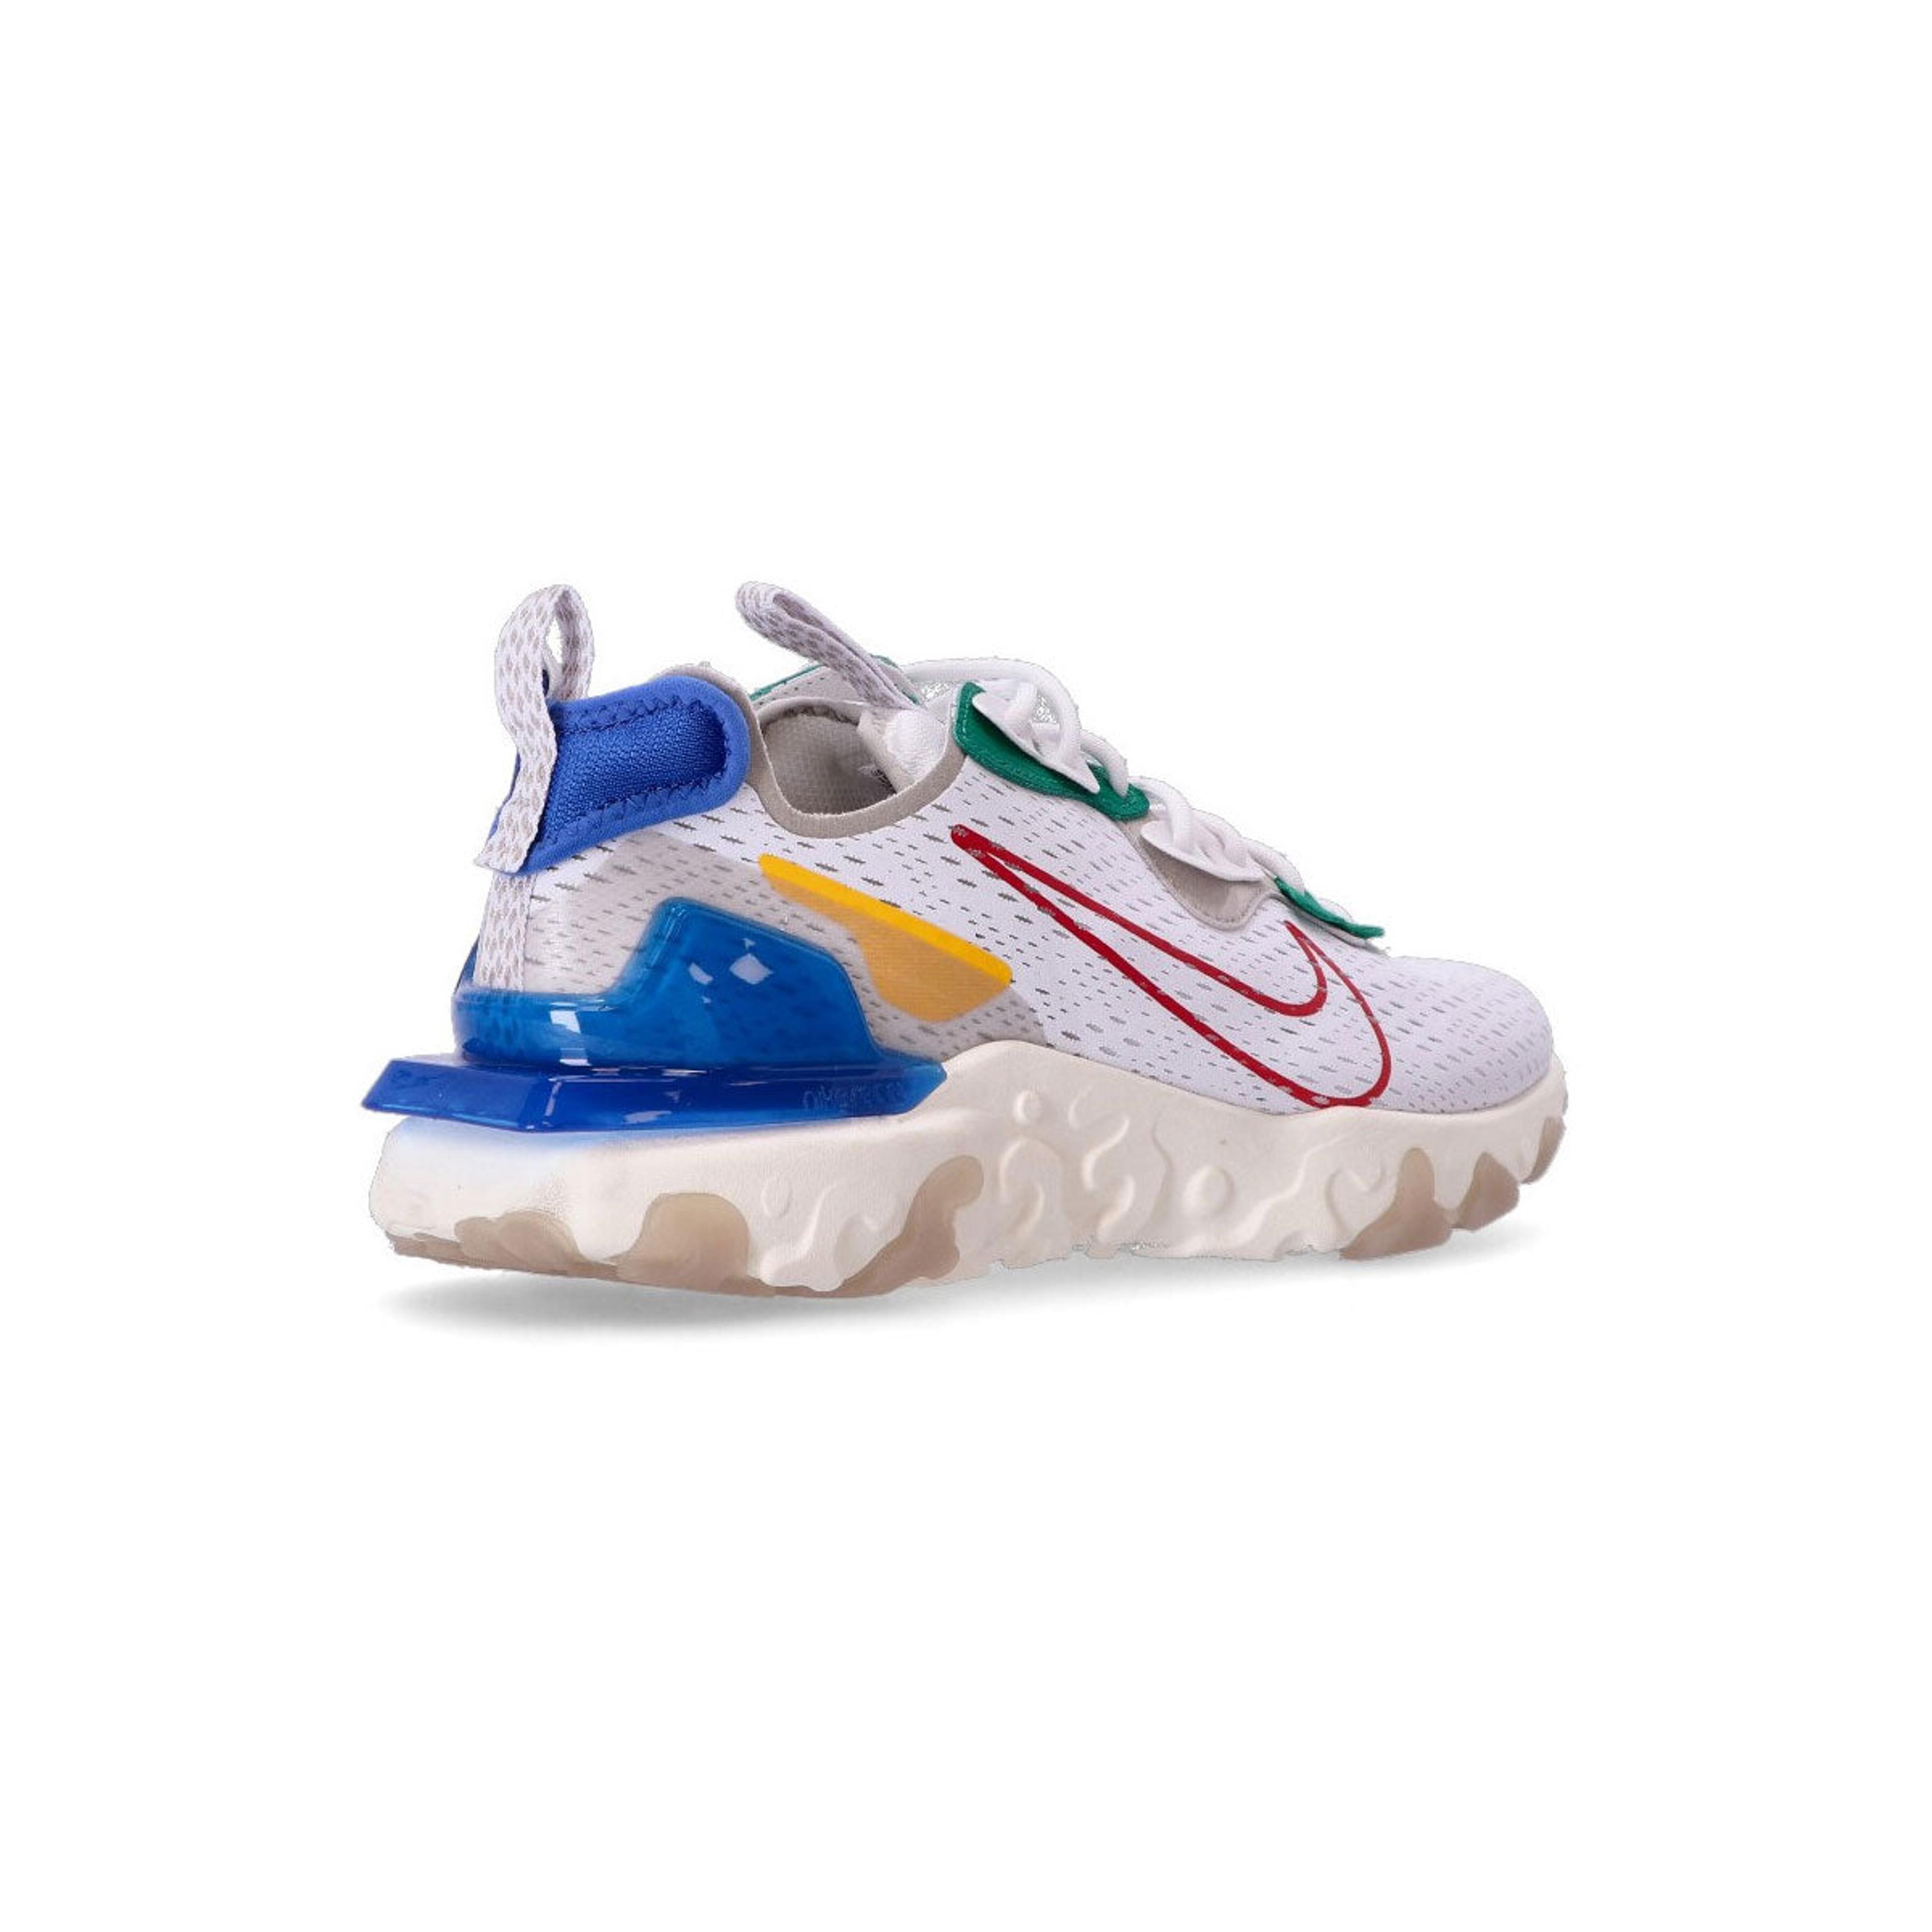 Alternate View 2 of Nike Men's React Vision Summer Brights